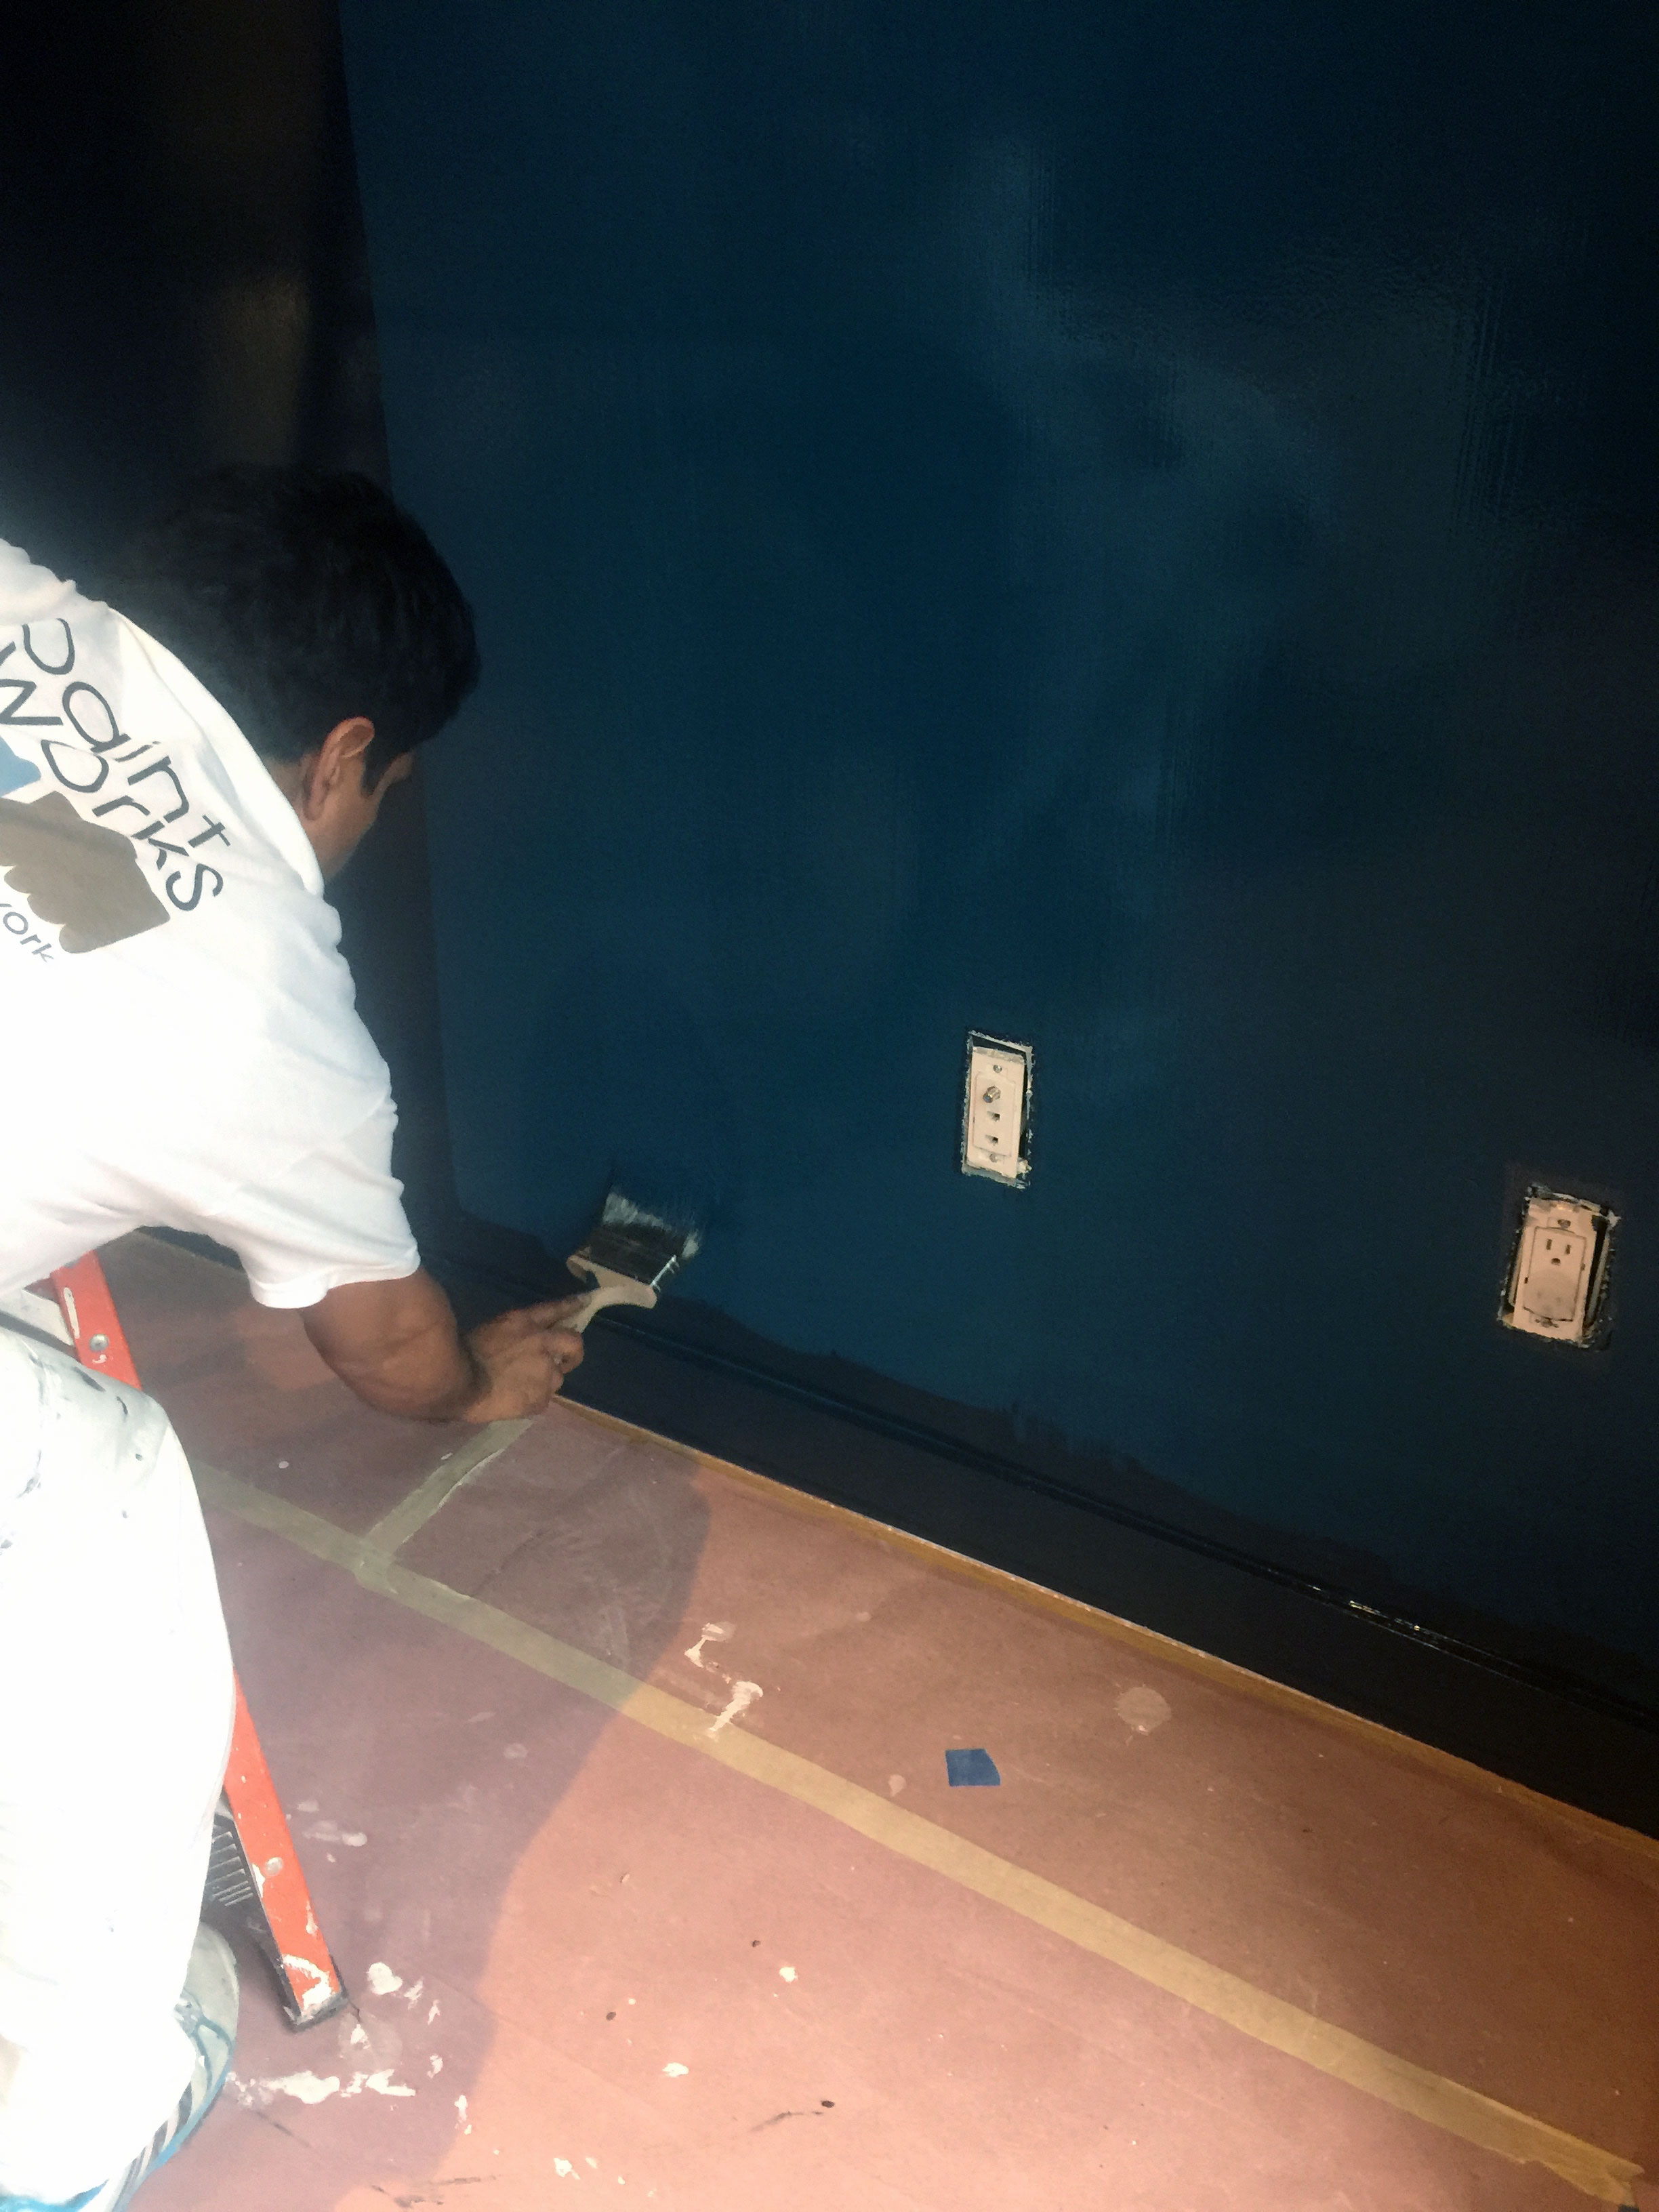 painter painting a wall dark blue with a brush